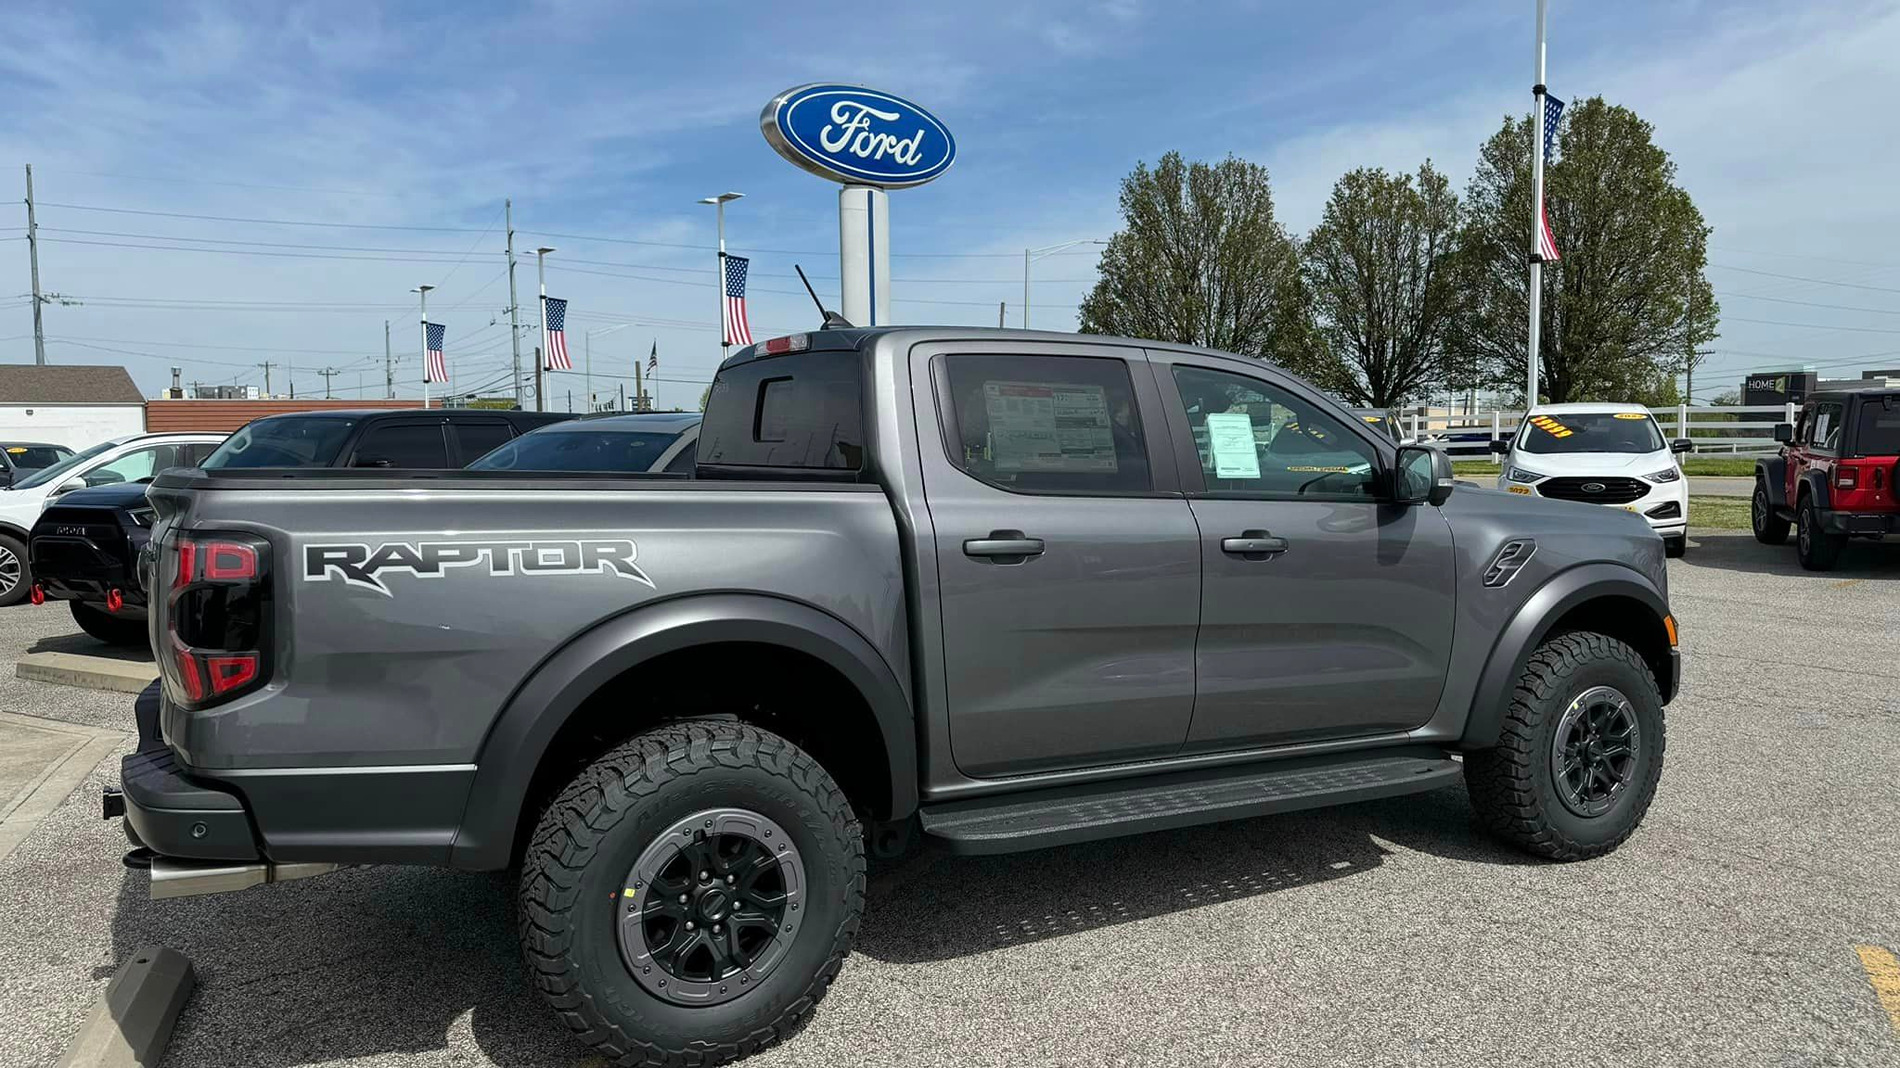 Ford Ranger Picked up my Baby Raptor (No Pre-Order, Paid MSRP, bought in Kentucky 26APR) 438217277_10106876284313294_5336636530936076815_1